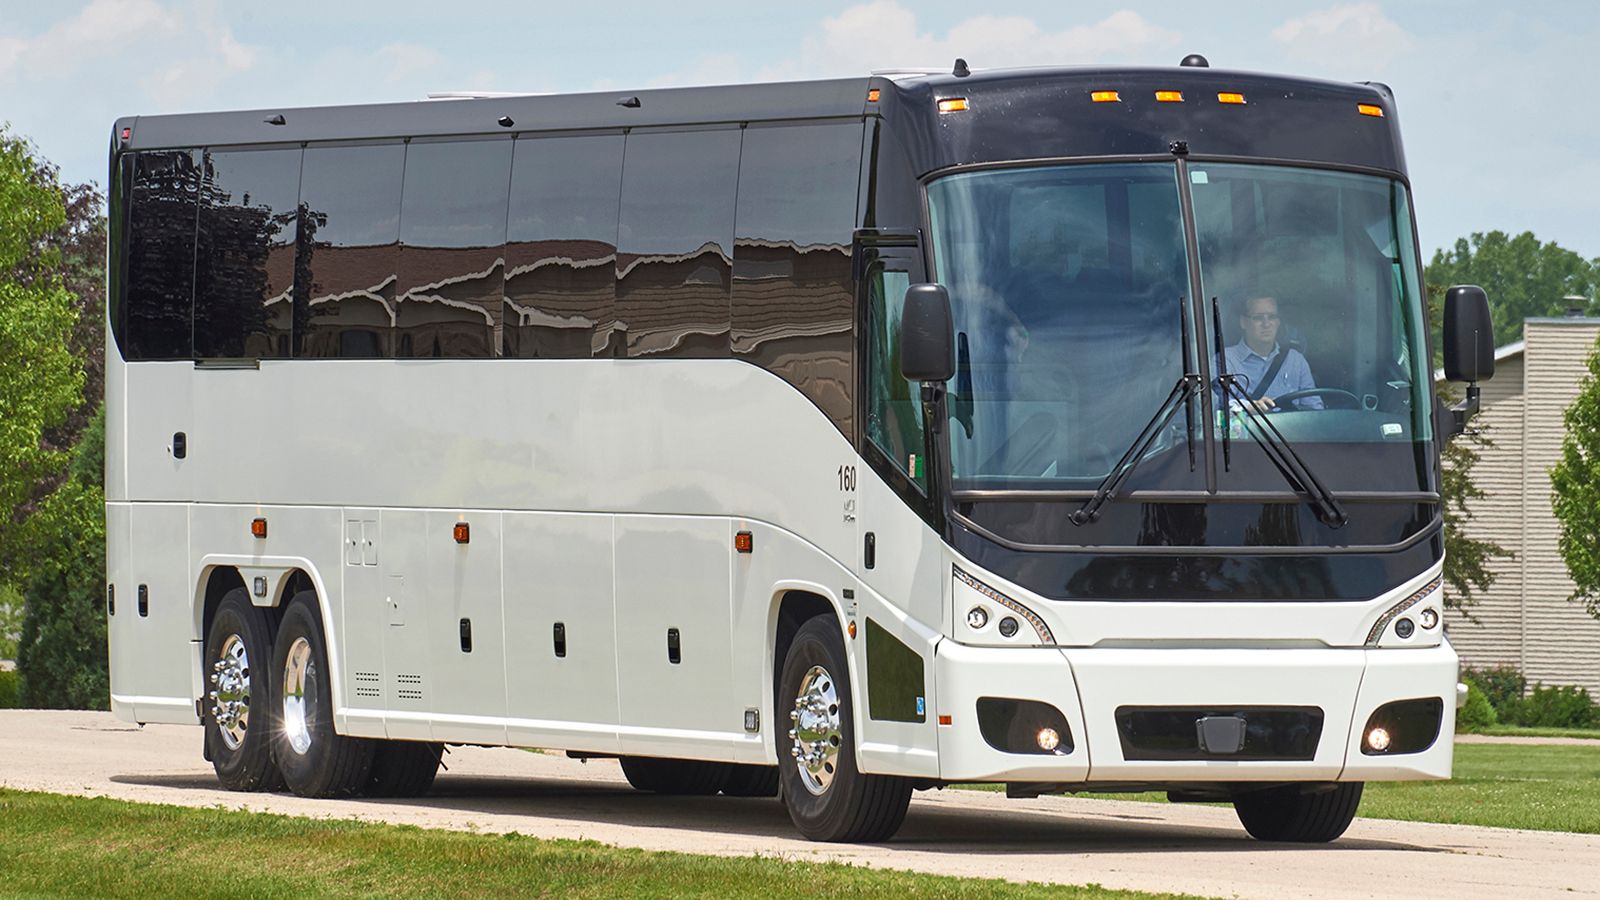 Motorcoach operating authority